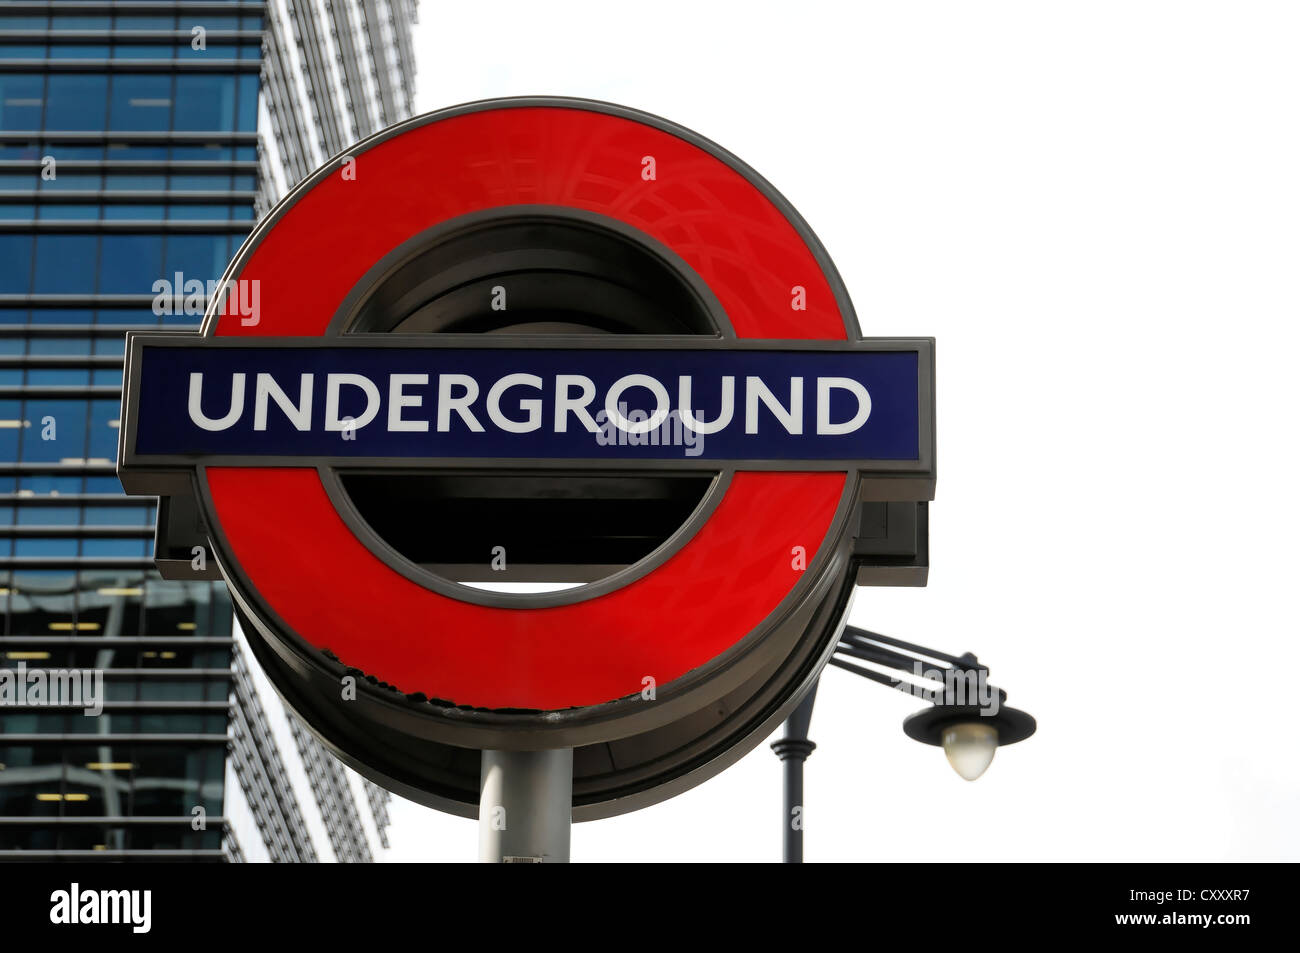 Logo on one of the Underground railway stations at Canary Wharf in London, England, United Kingdom, Europe Stock Photo